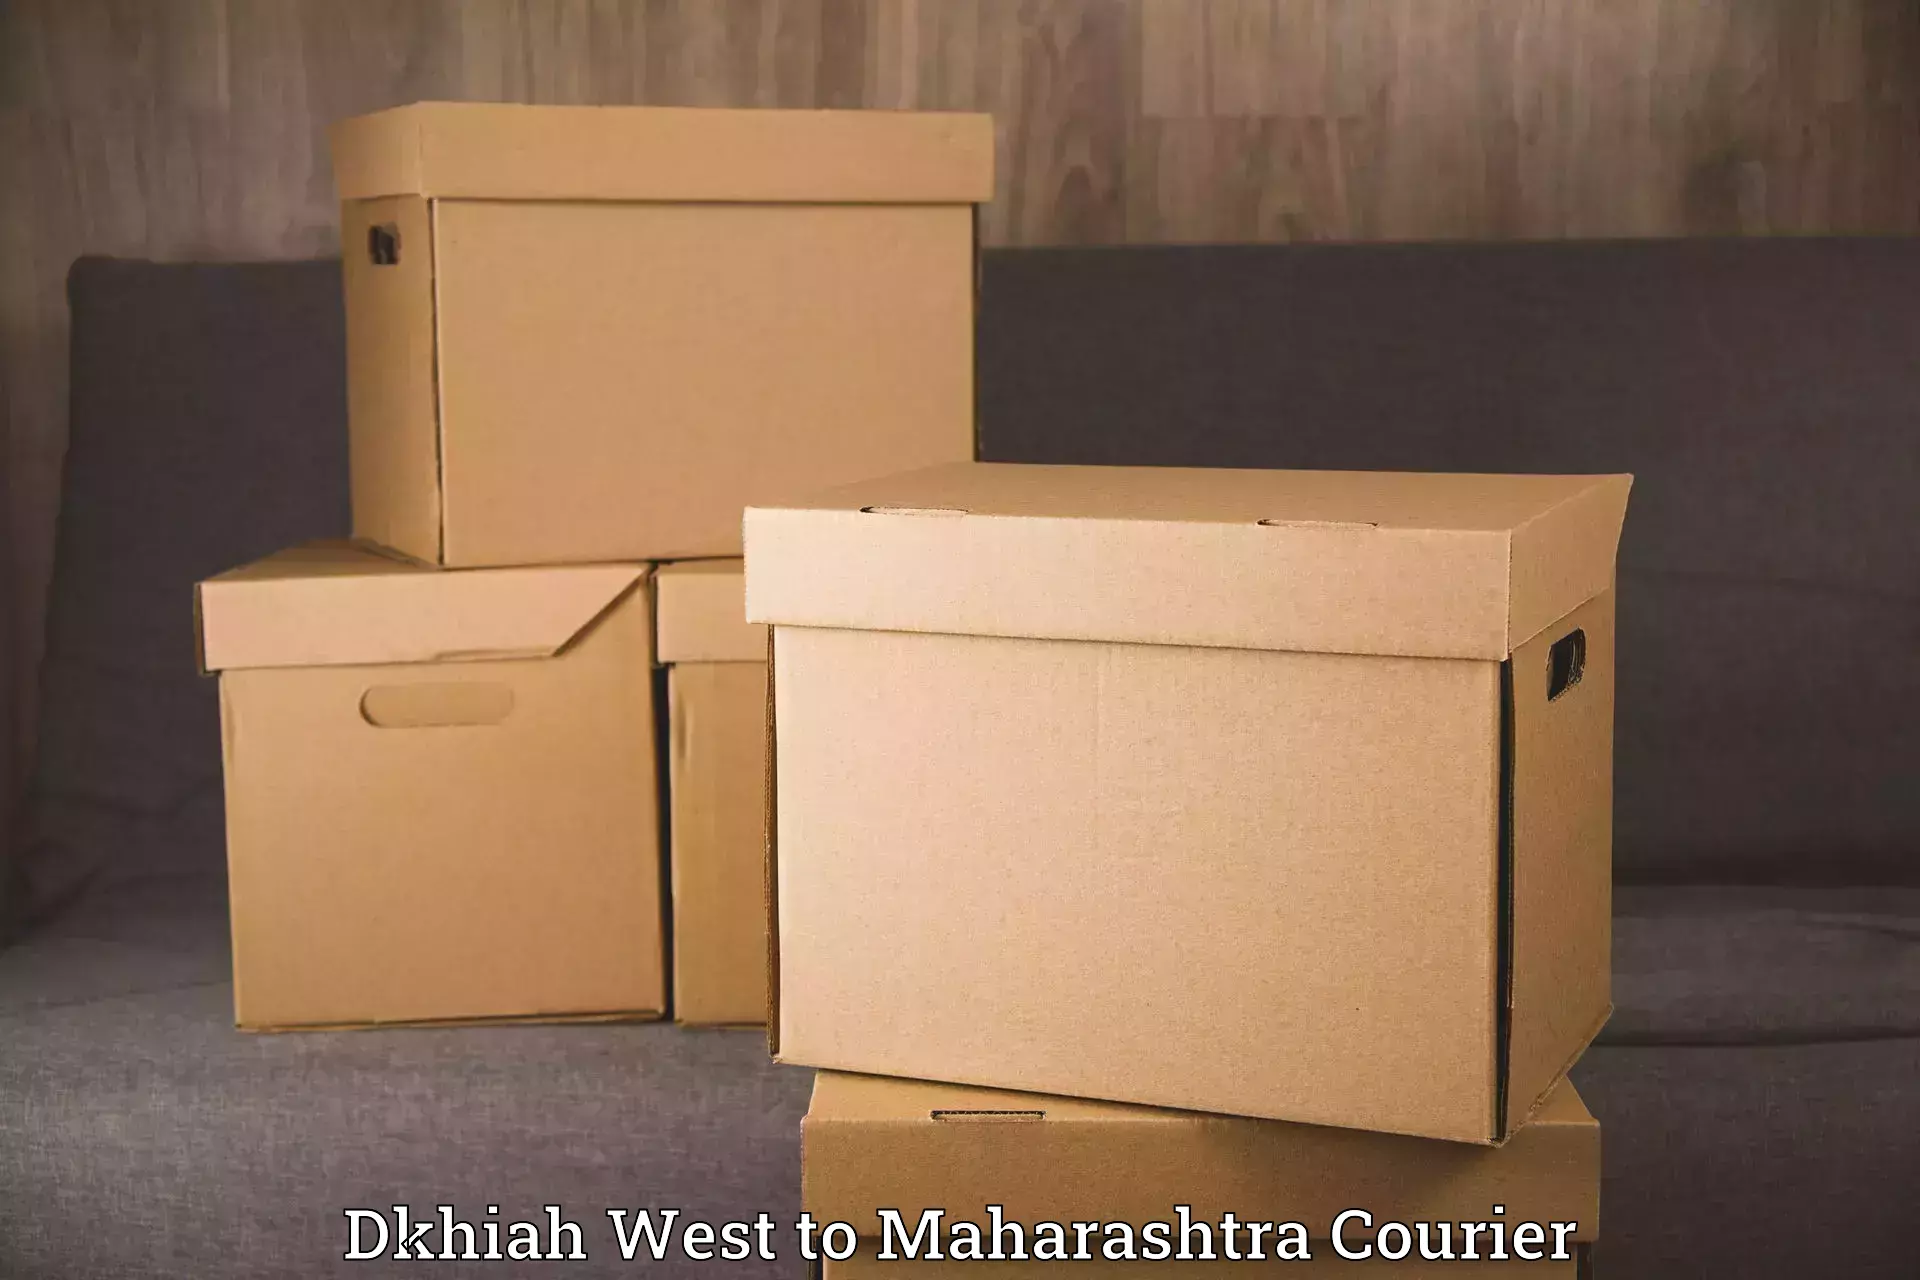 Furniture relocation experts Dkhiah West to Maharashtra